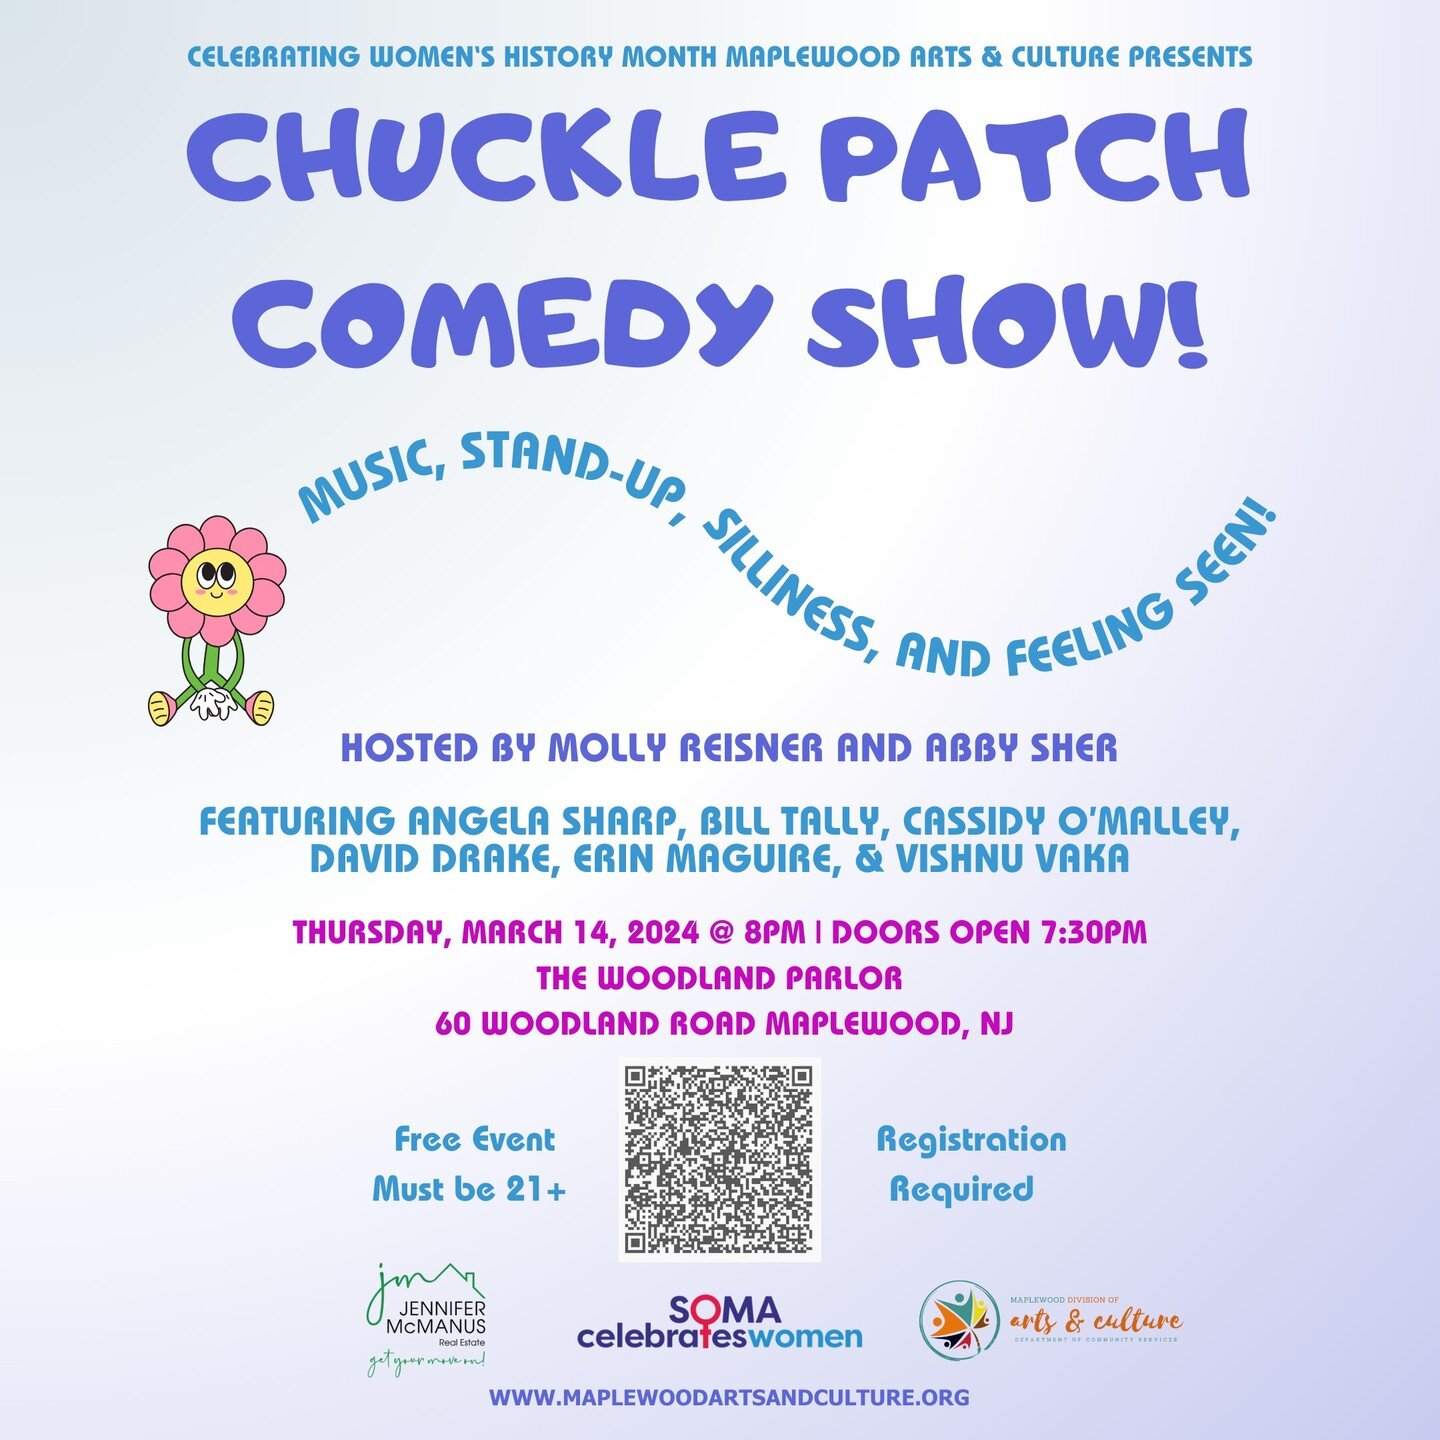 In Celebration of Women&rsquo;s History Month
Maplewood Arts &amp; Culture Presents: Chuckle Path Comedy Show 
This is gonna be a fun show!! 
Light refreshments available.

Reservations limited to two seats per person

Featuring
Erin Maguire
David Dr